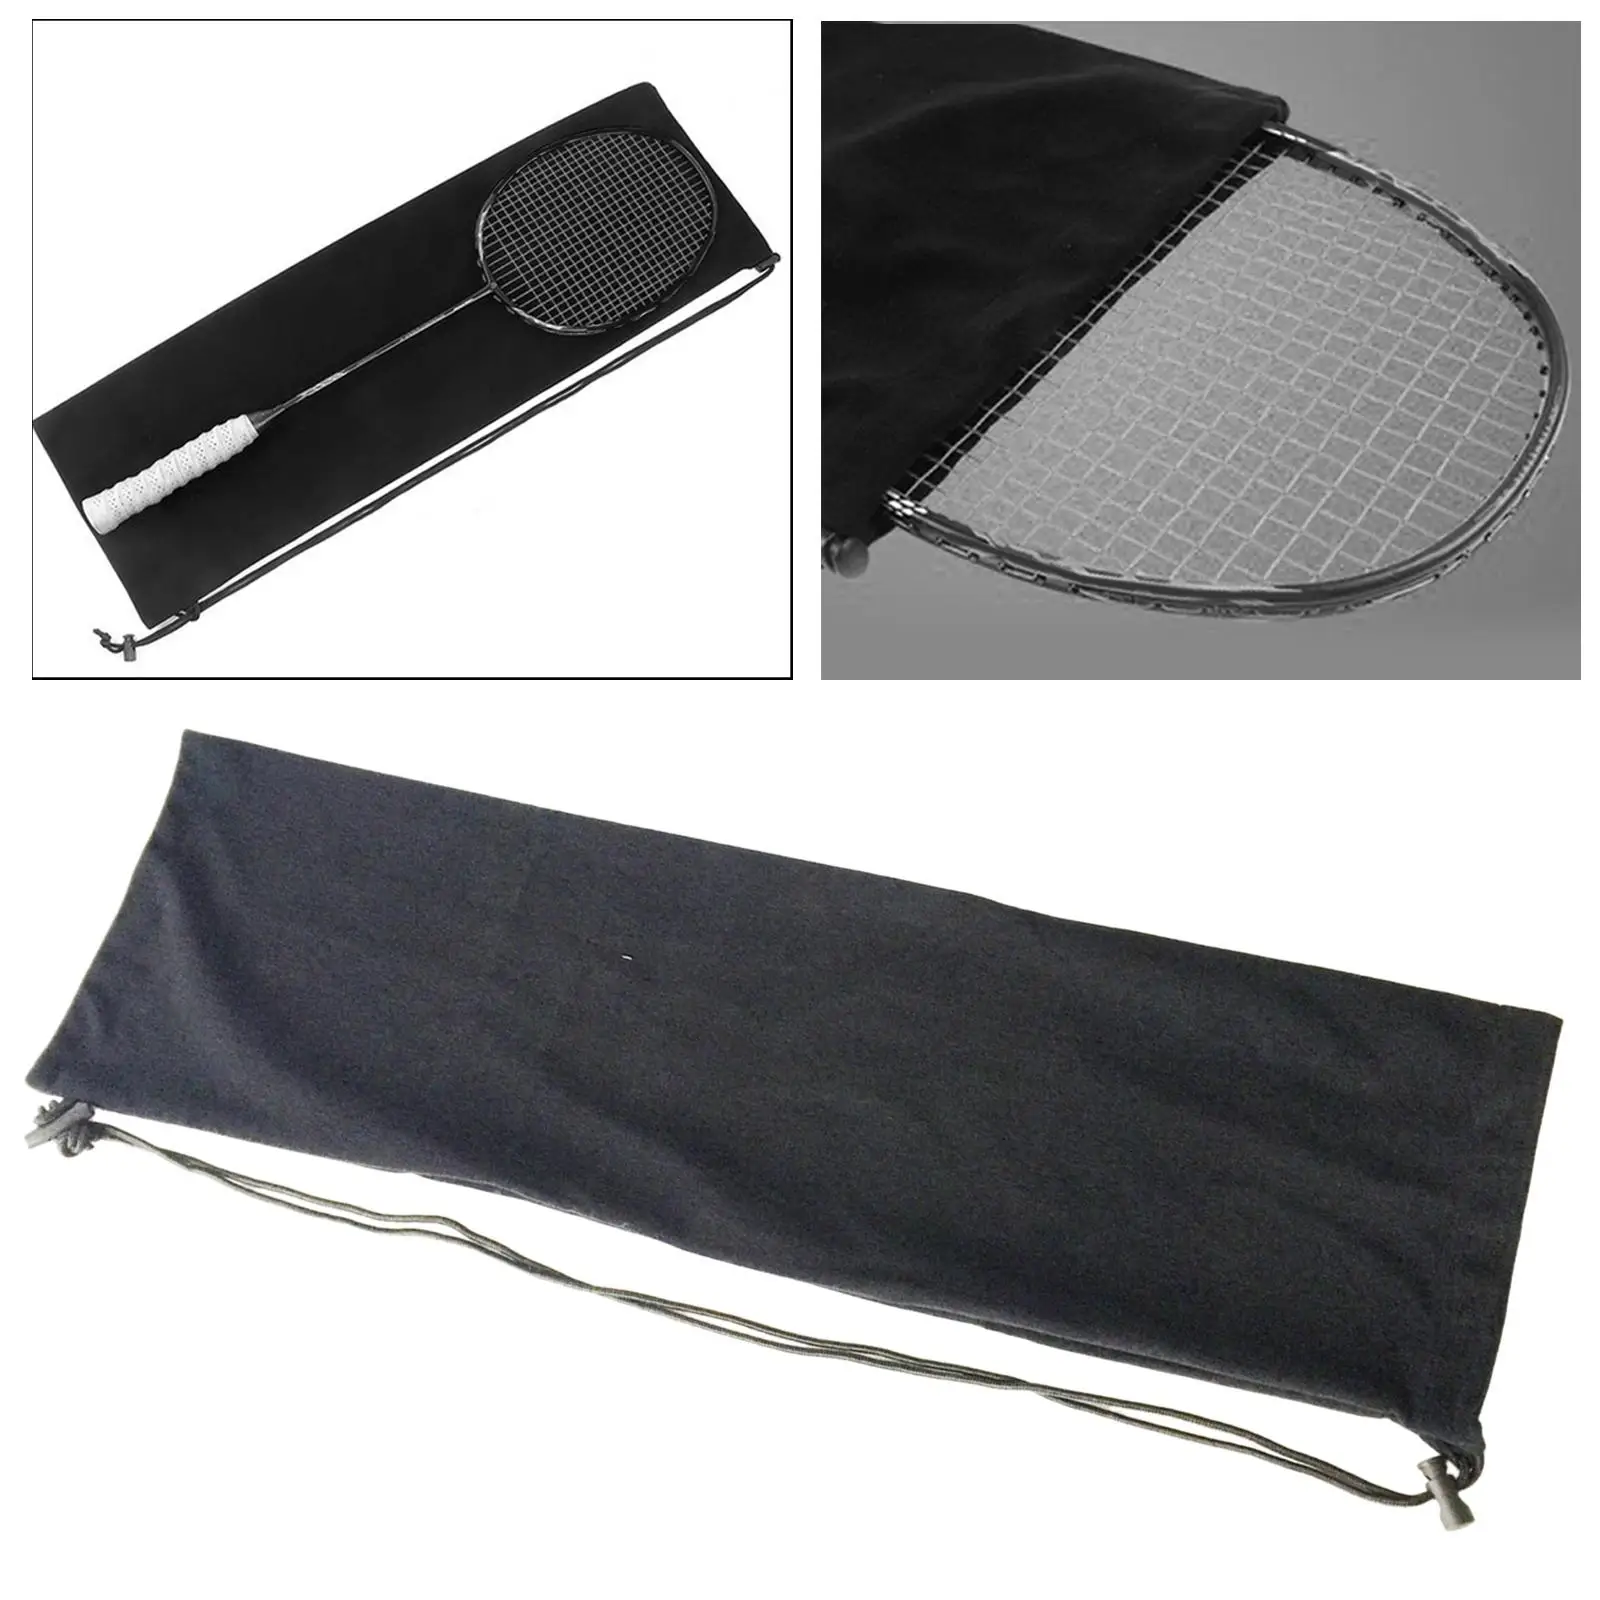 Racquet Tennis Bag Protective Case Drawstring Storage Bag Pouch for Outdoor